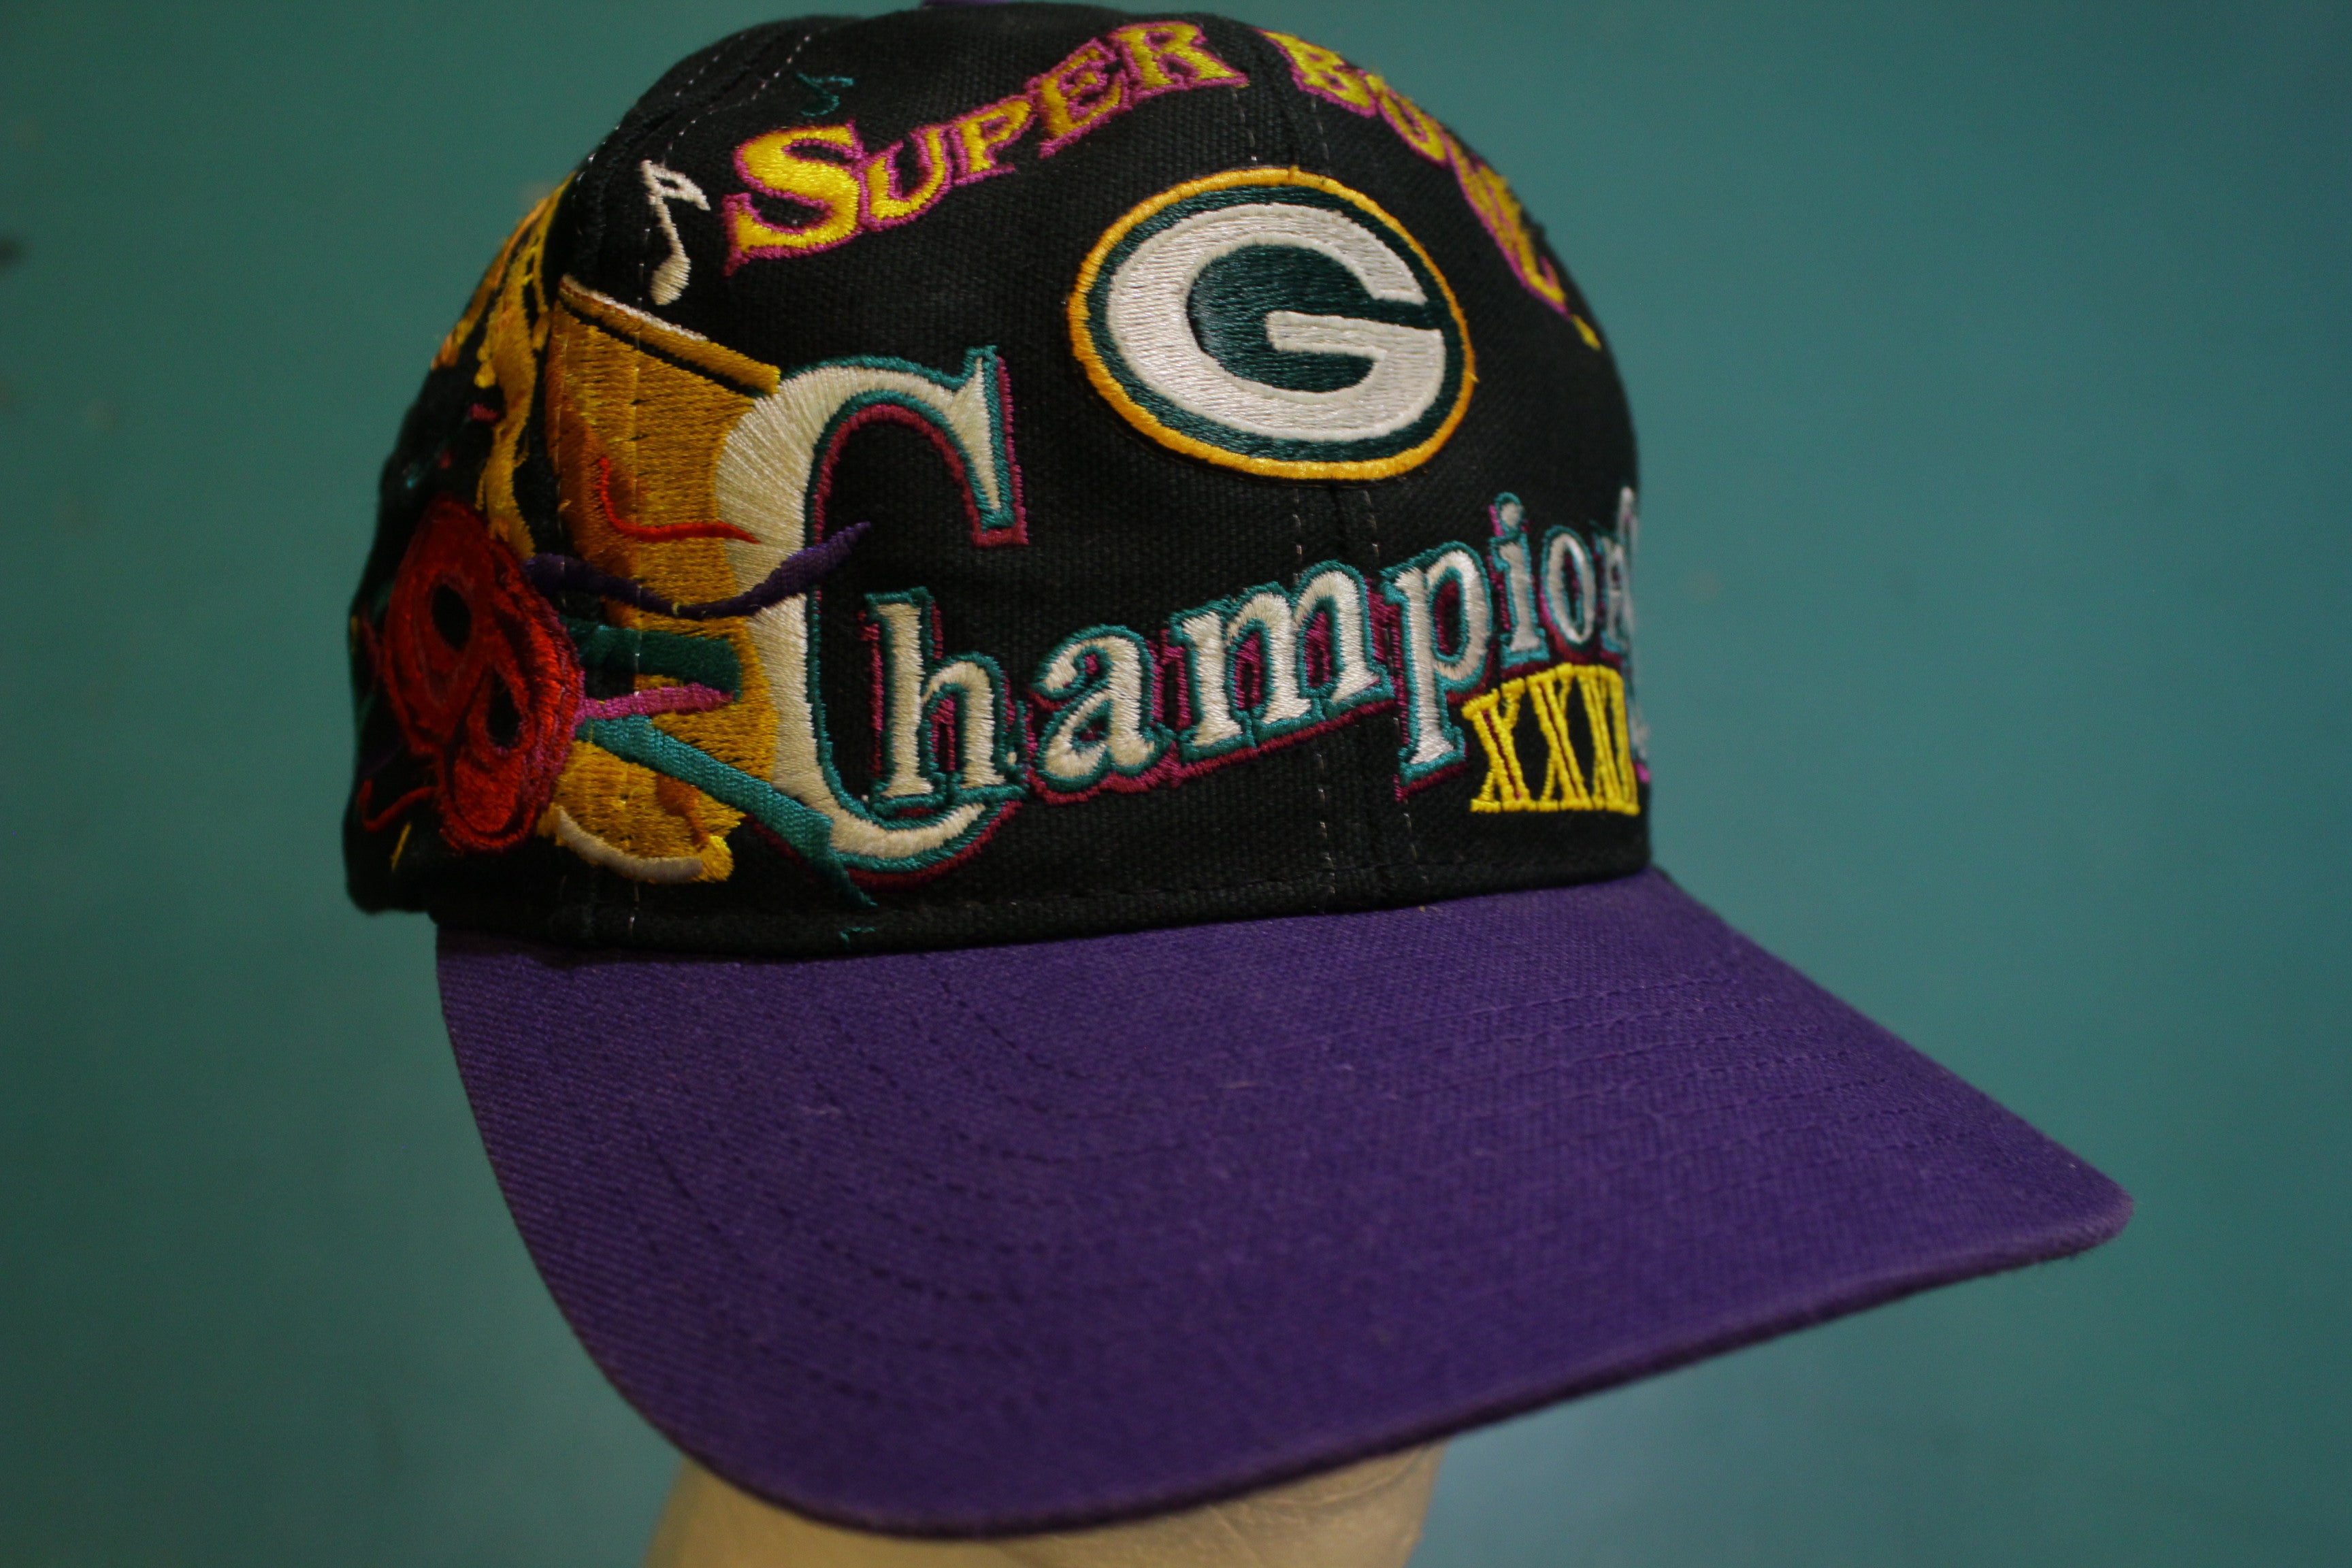 Super Bowl XXXI 31 Greenbay Packers Champs 90's Vintage Snapback